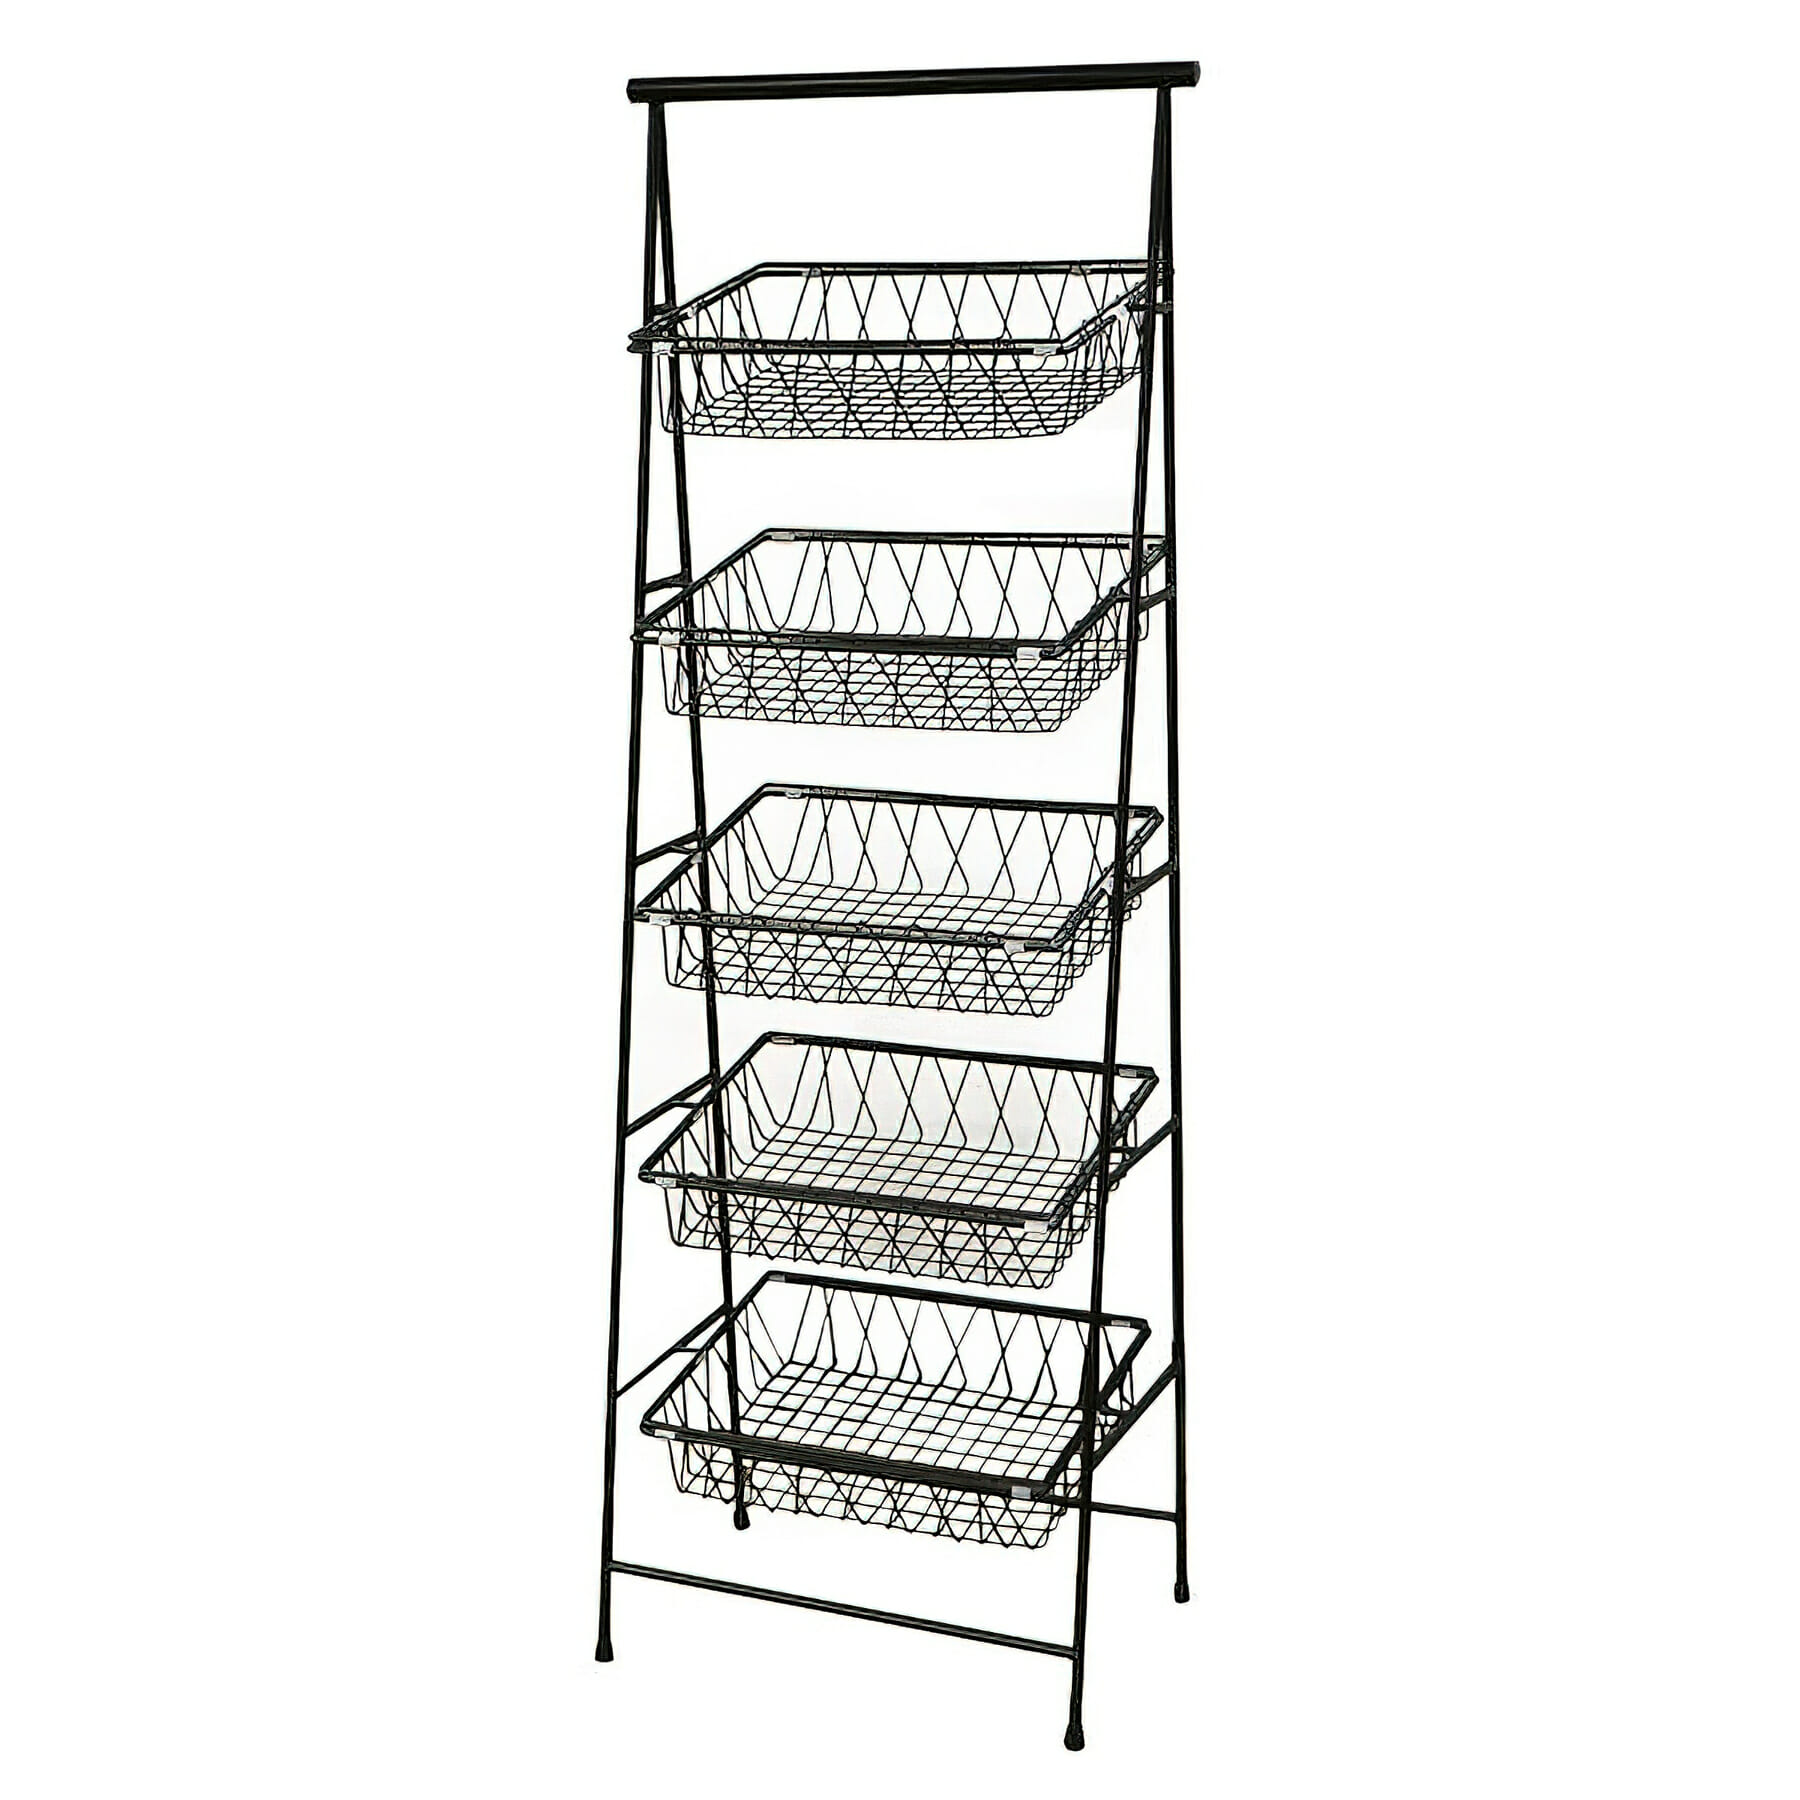 23.5" x 14" Rectangular 5-Tier Tilted Pane Stand, 64" tall (fits IR-903, IR-904, BAMTRY-01, BAMTRY-02, WB-953, WB-954)